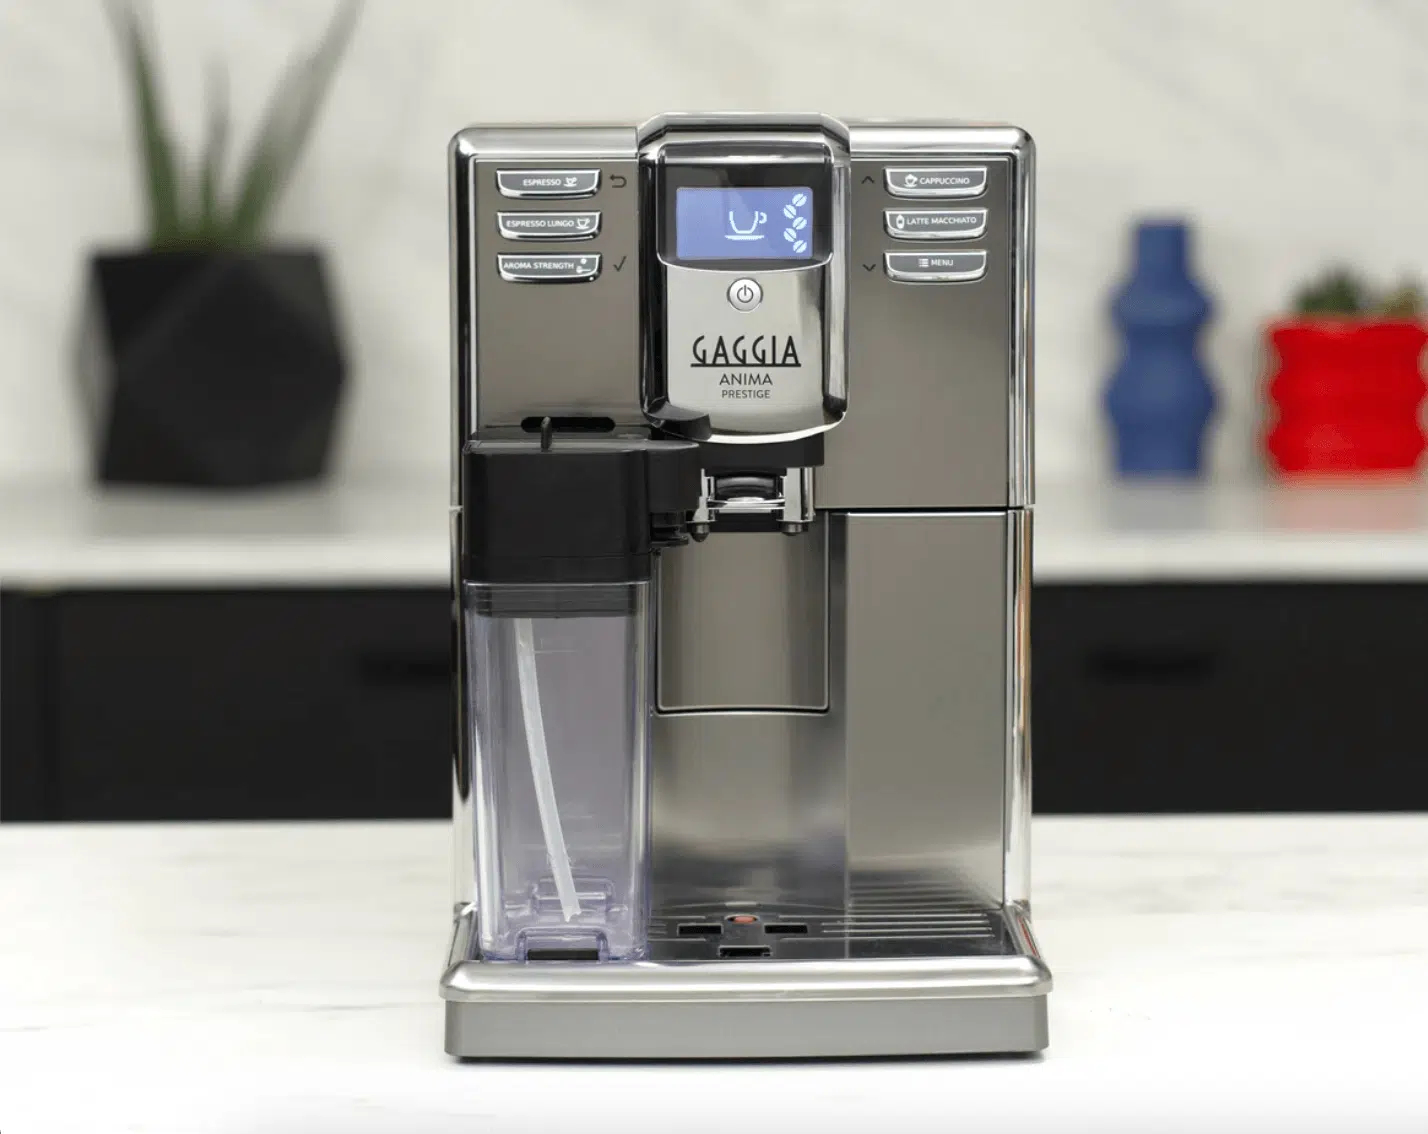 Best Fully Automatic Espresso Machine, by Blogger What The Fab